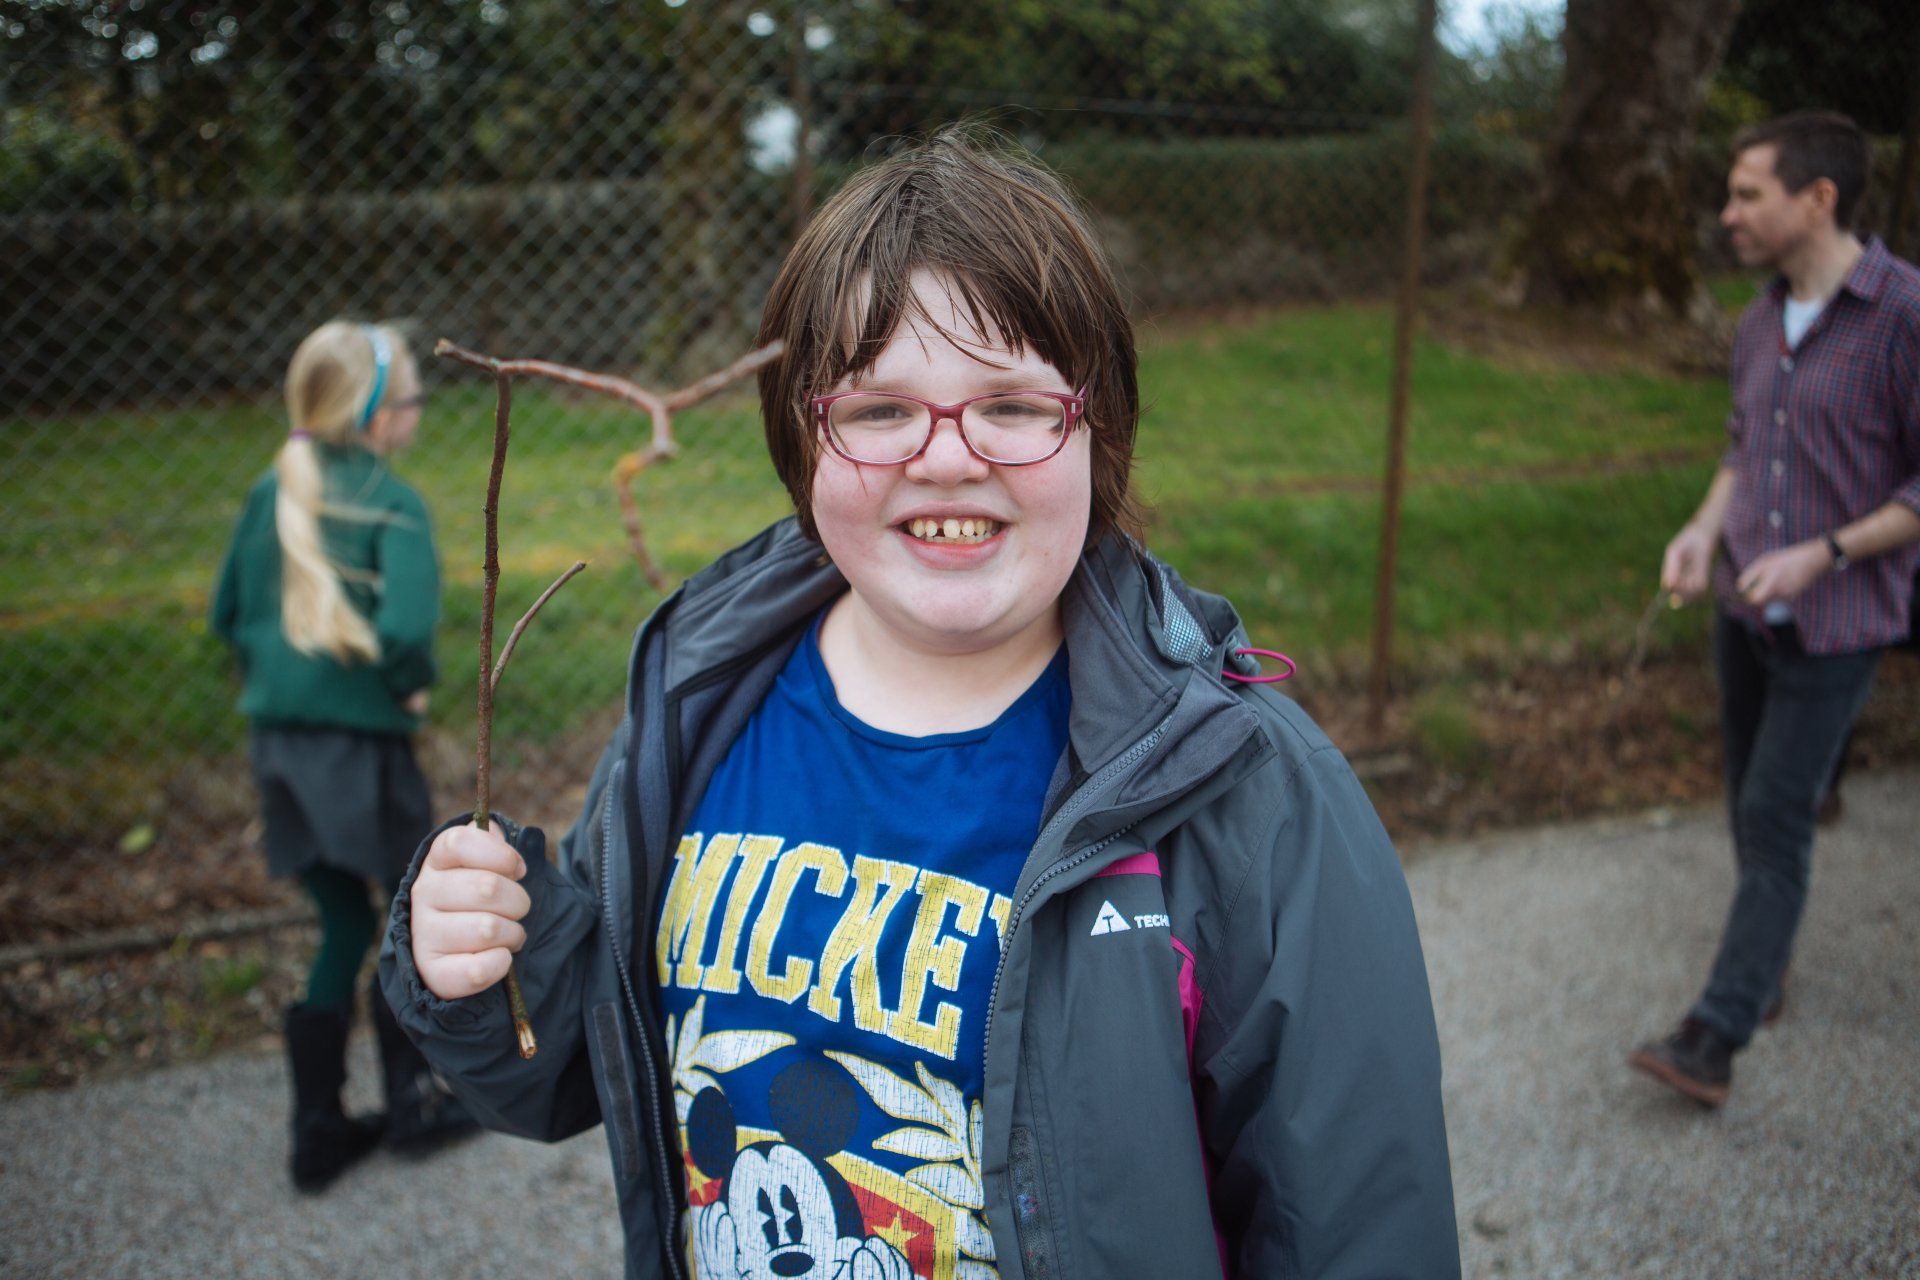 a young girl wearing a mickey mouse shirt is holding a stick in her hand .